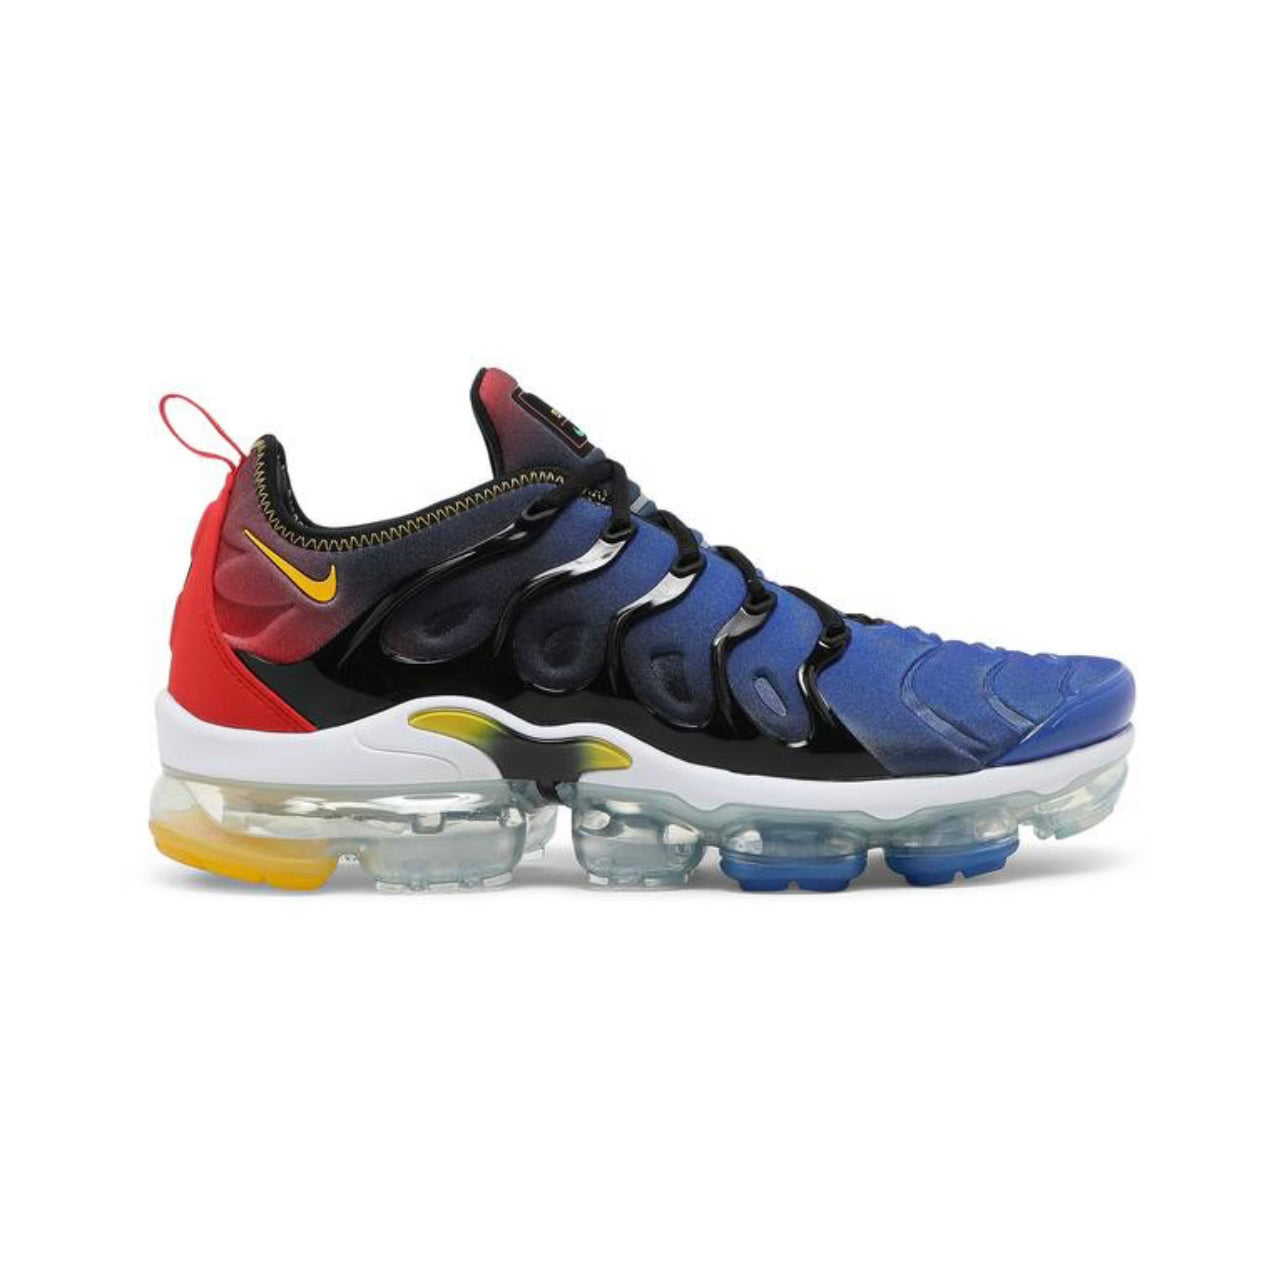 Nike Air Vapormax Plus "Live Together, Play Together"